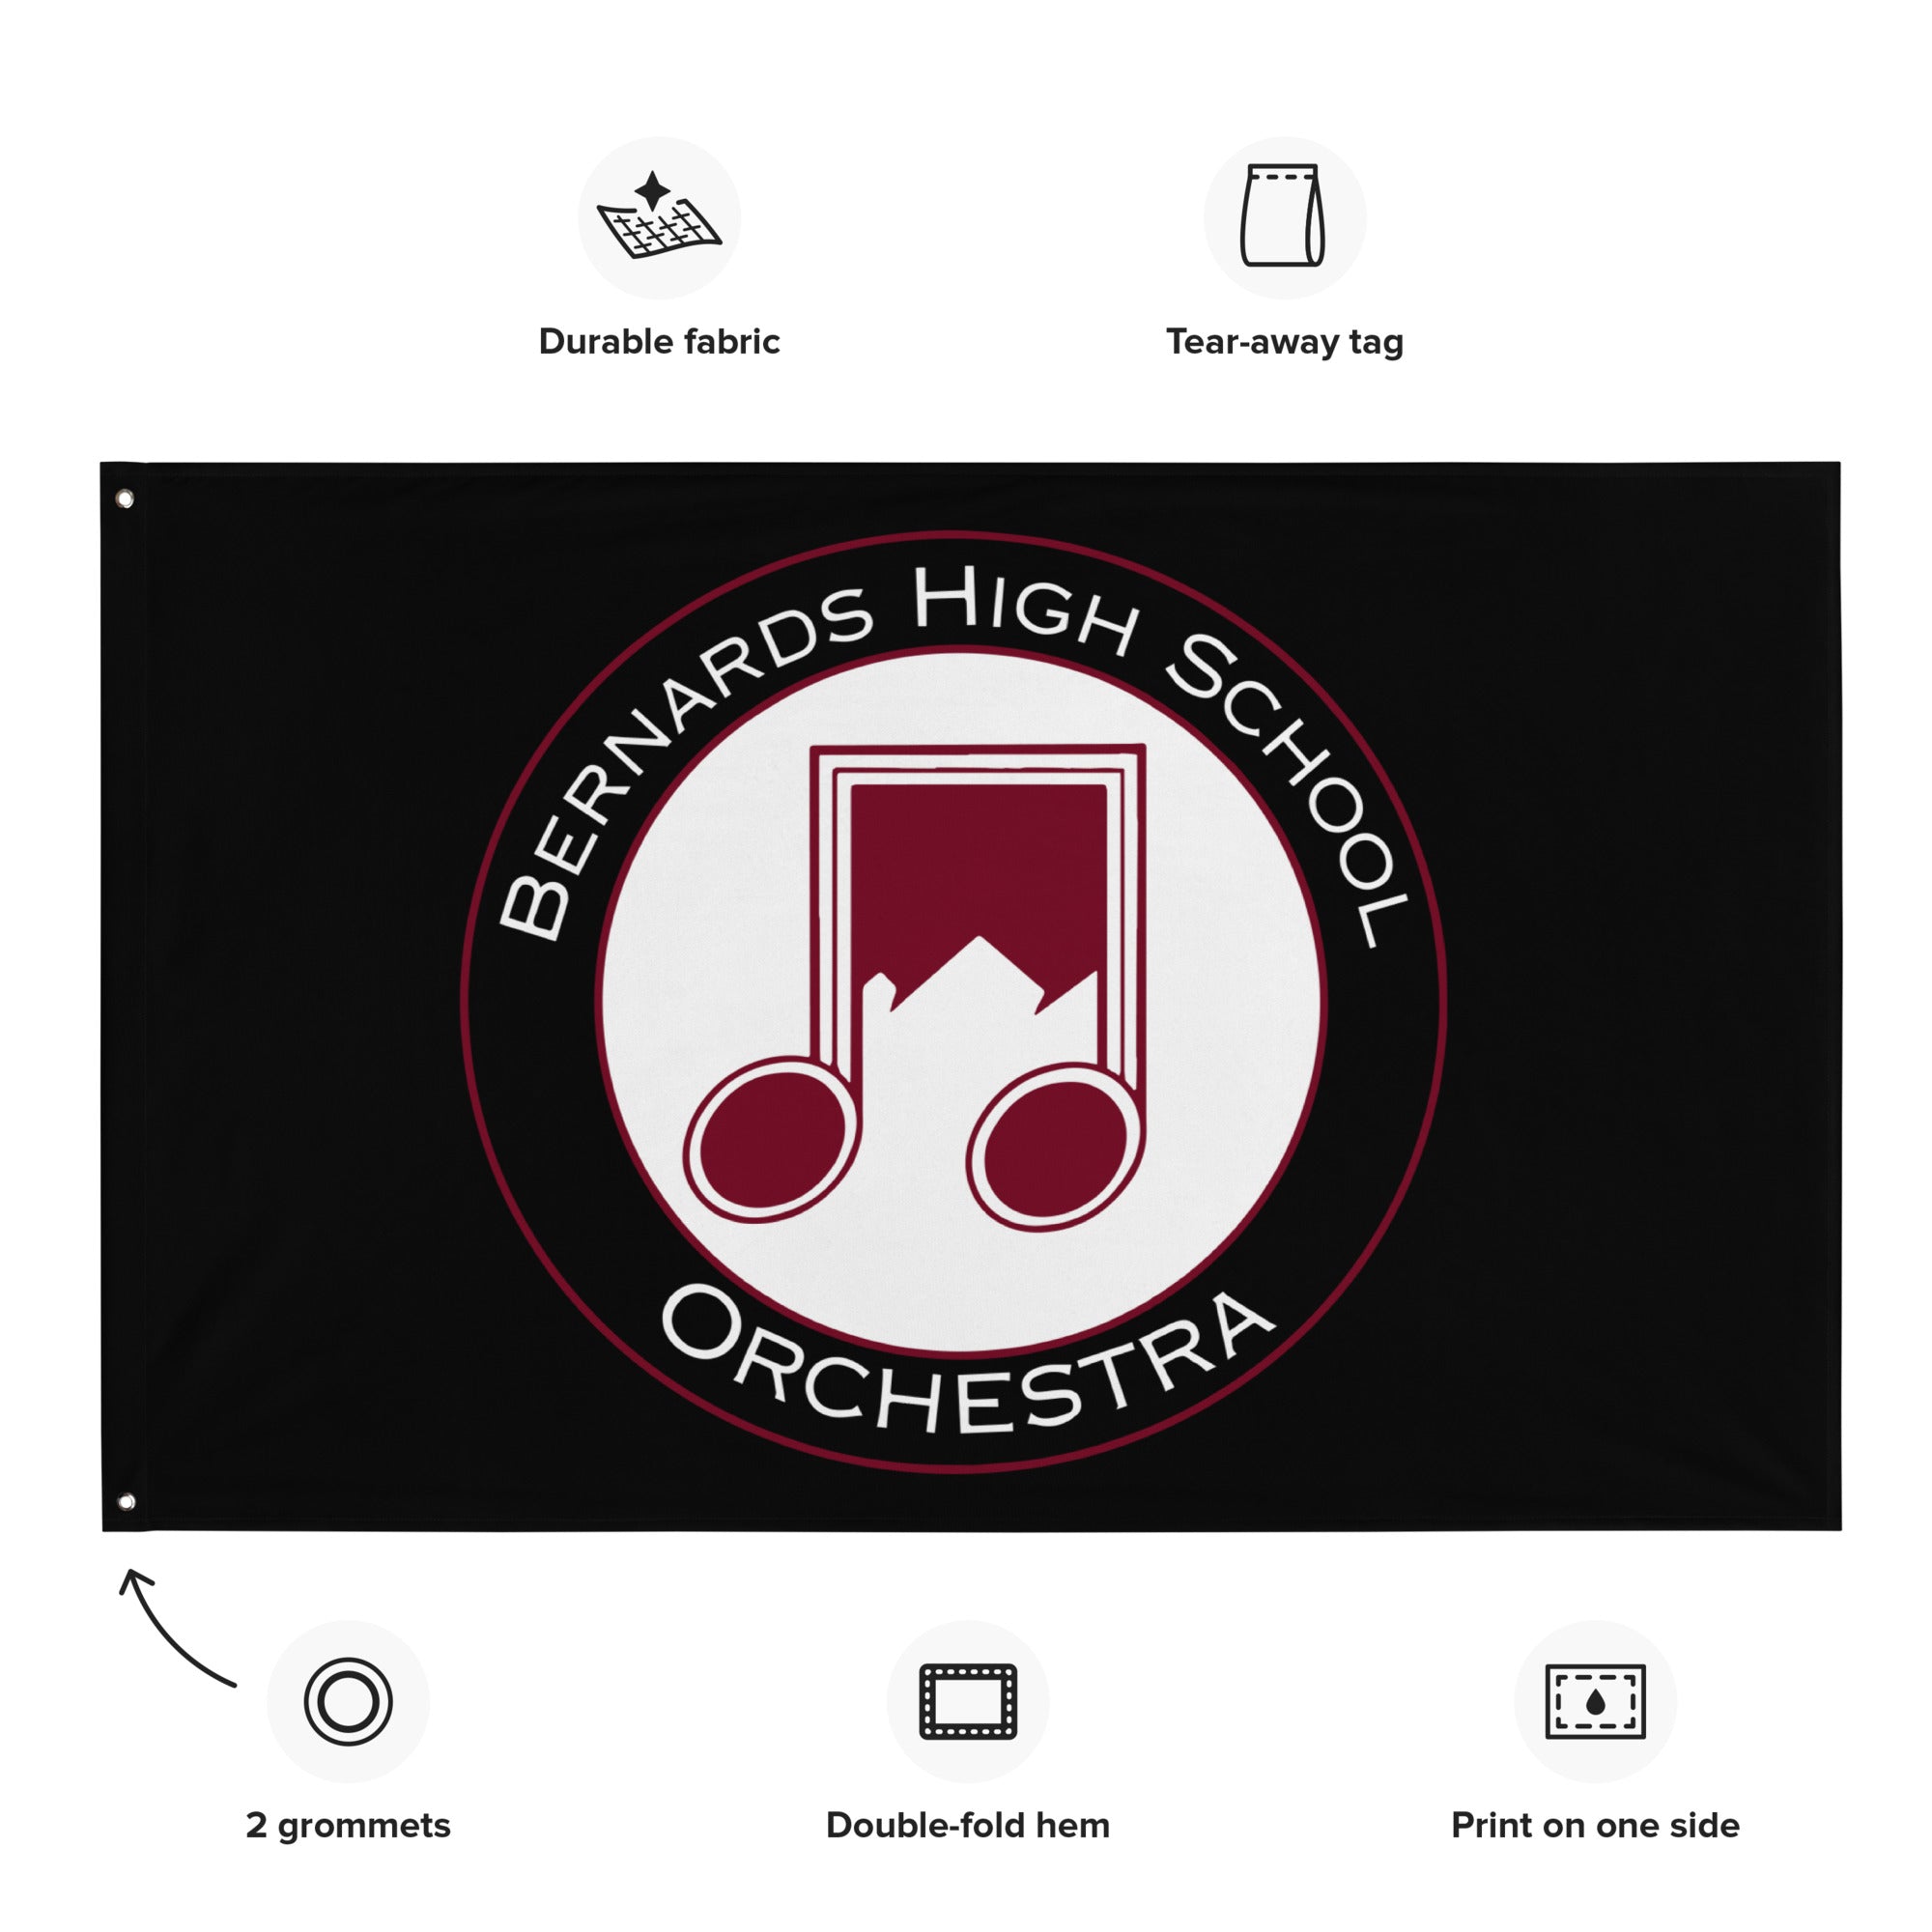 BHS Band Orchestra Flag